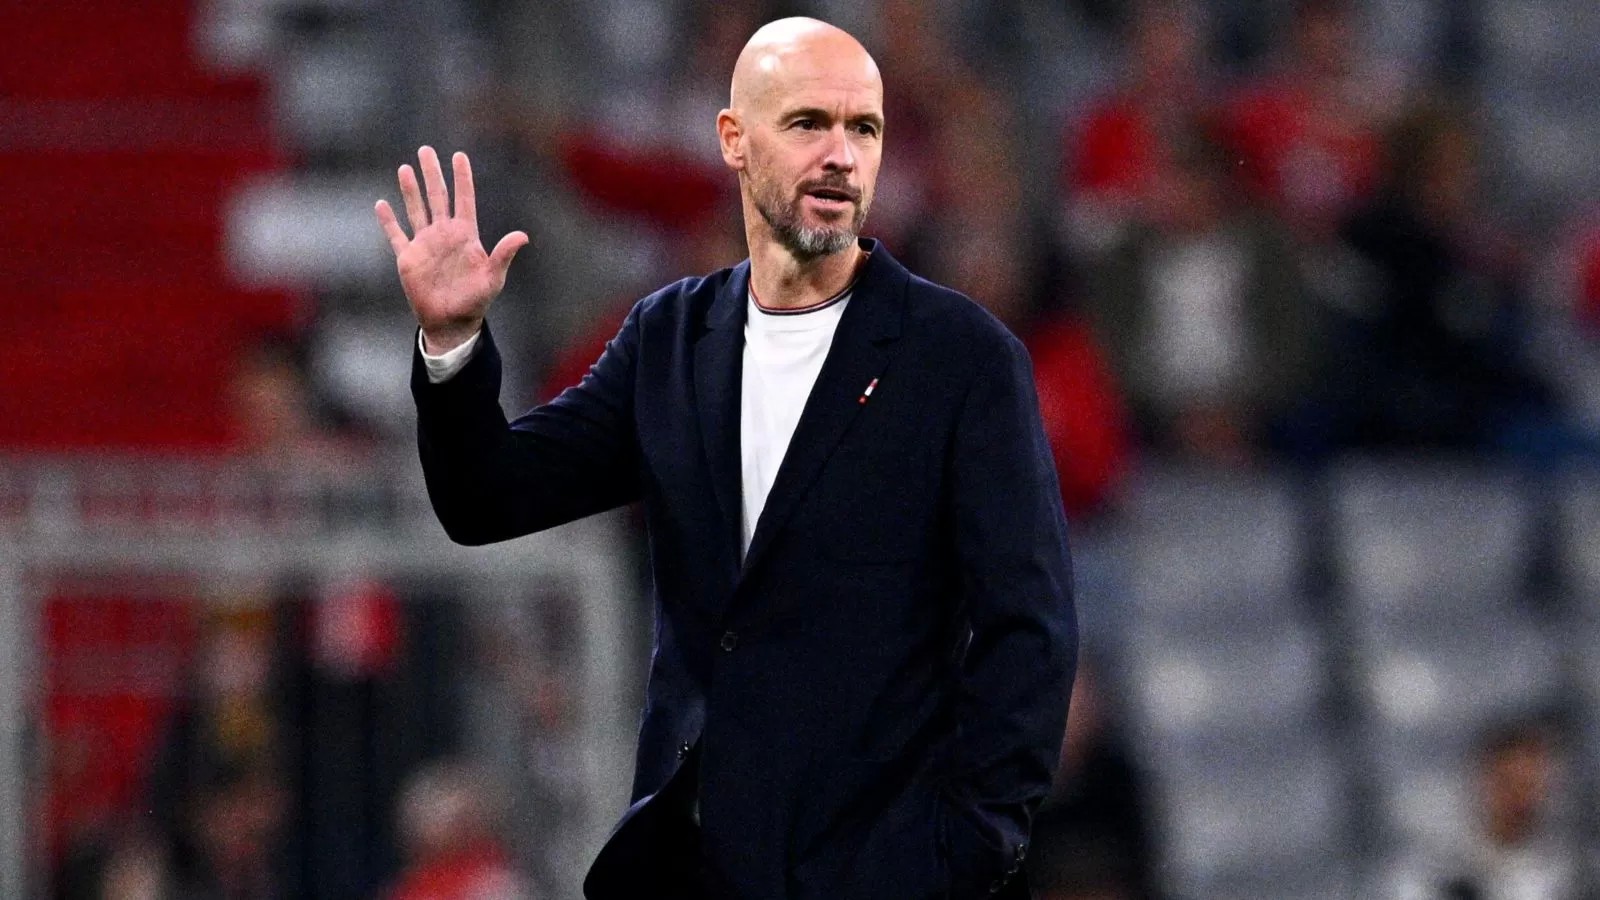 Ten Hag hails ‘massively important’ Man Utd star who was ‘calm’ in ‘must-win game’ against Burnley